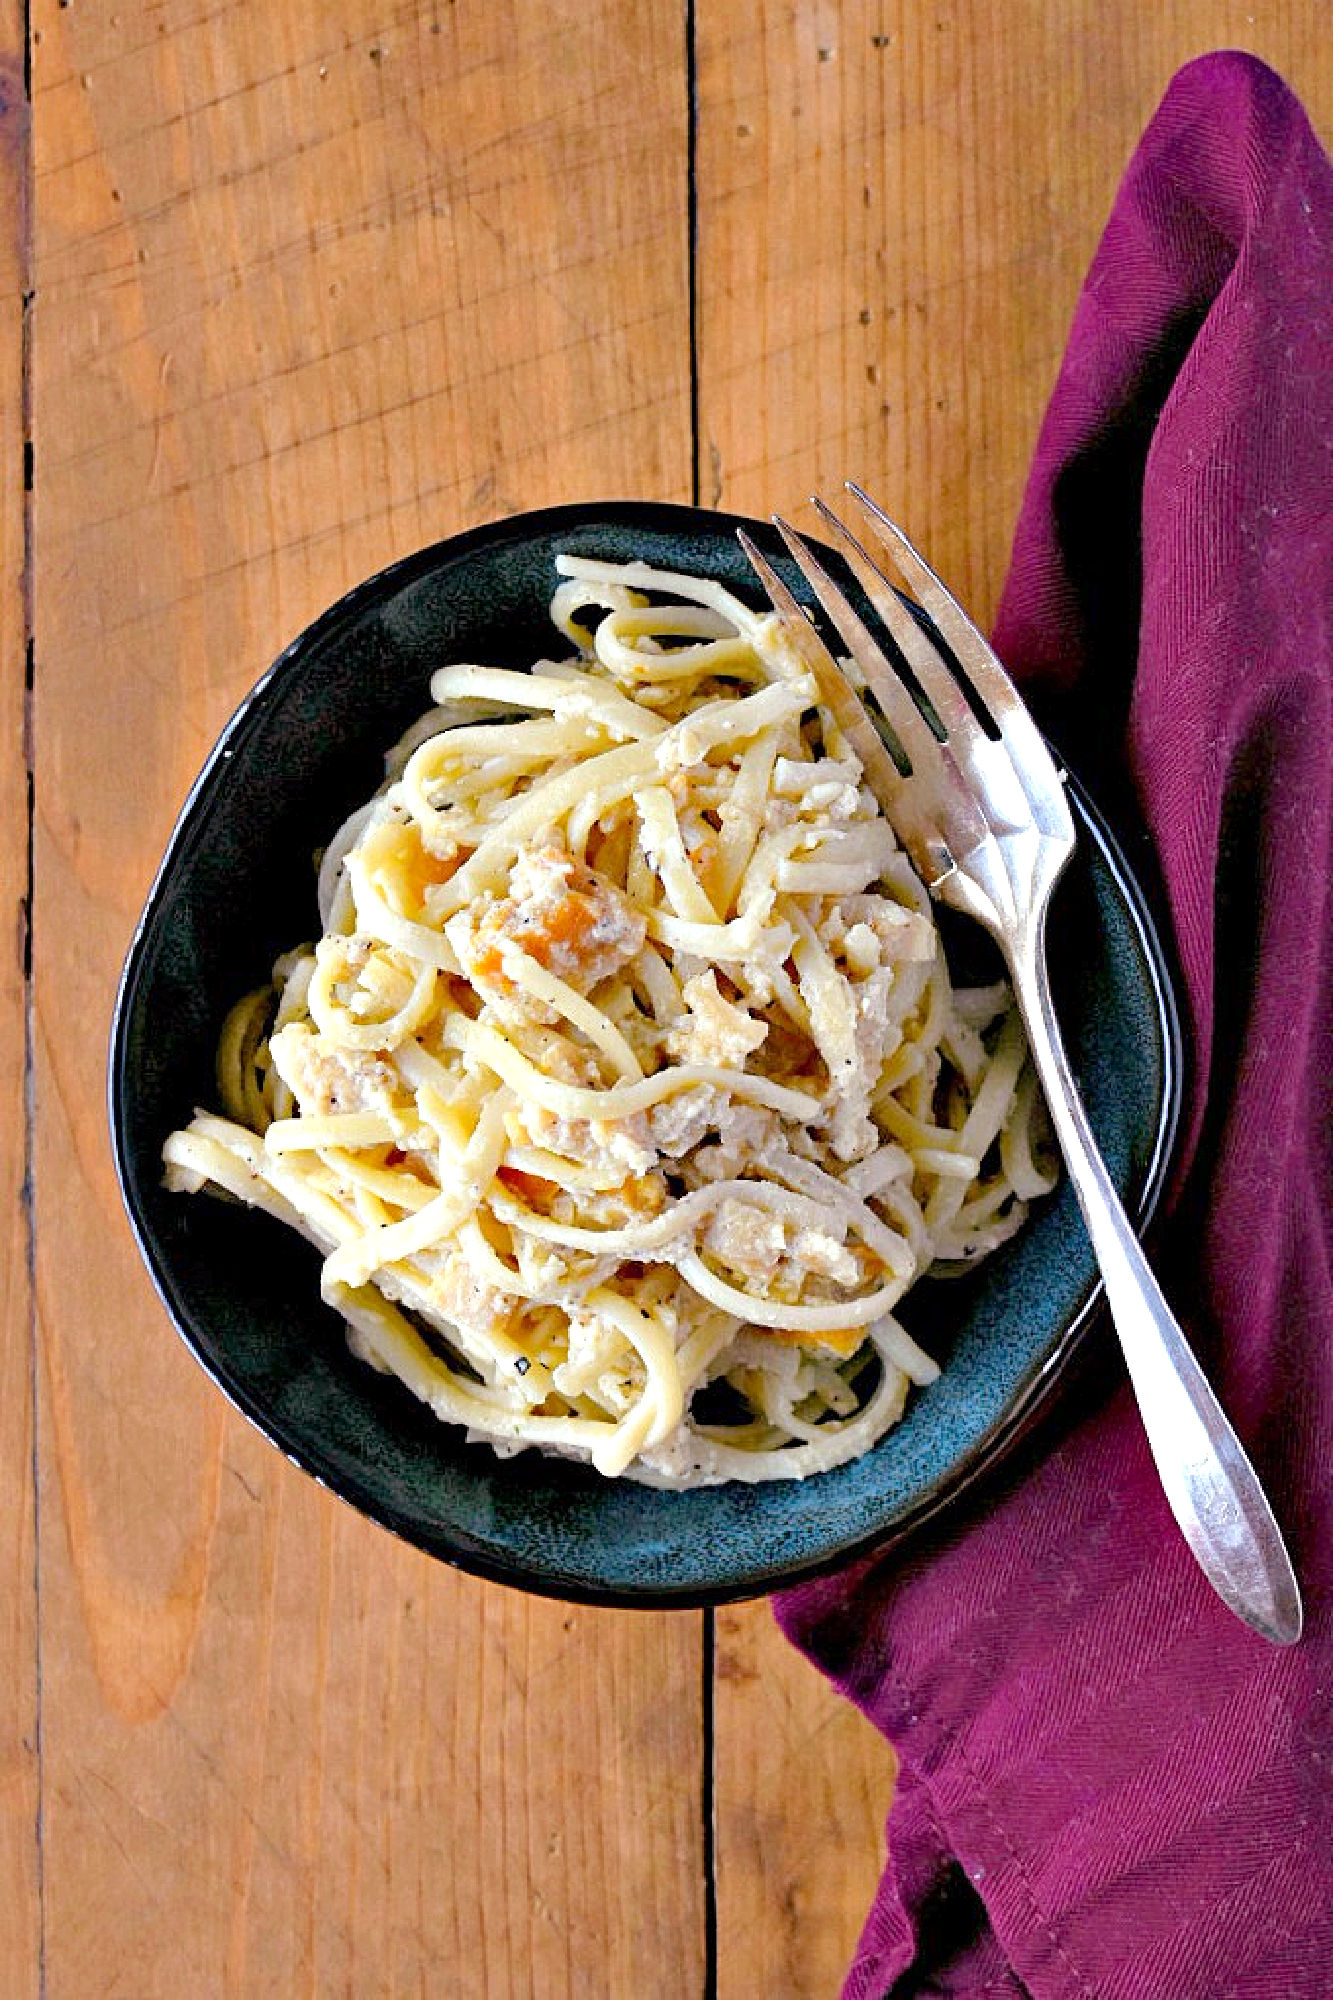 Tender, canned Bar Harbor are combined with delicious carbonara sauce in this simple, yet amazingly delicious Linguine with Carbonara Clam Sauce that’s perfect for any night of the week!  #OurFamilyTable #clamlinguine #carbonarasauce #cannedclams #pantryrecipe